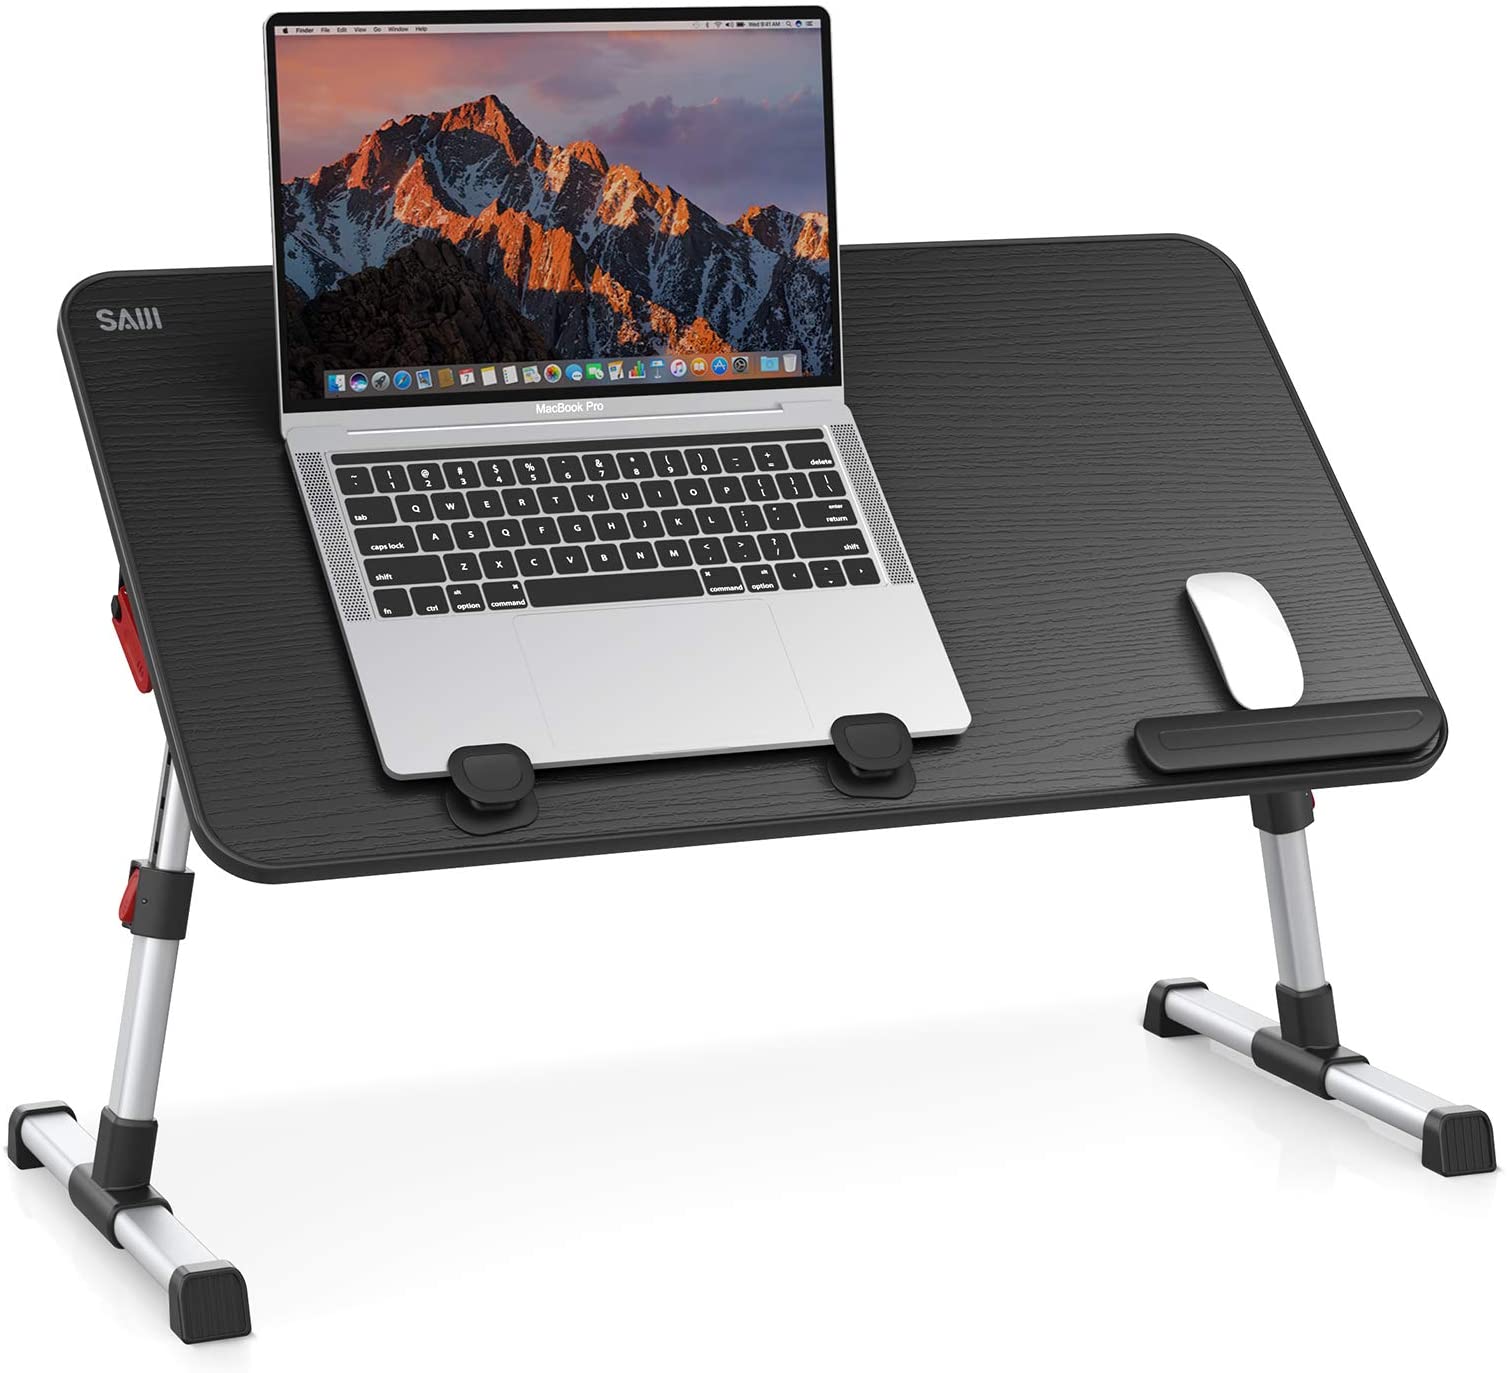 saiji-adjustable-laptop-stand-portable-standing-desk-bed-tray-table